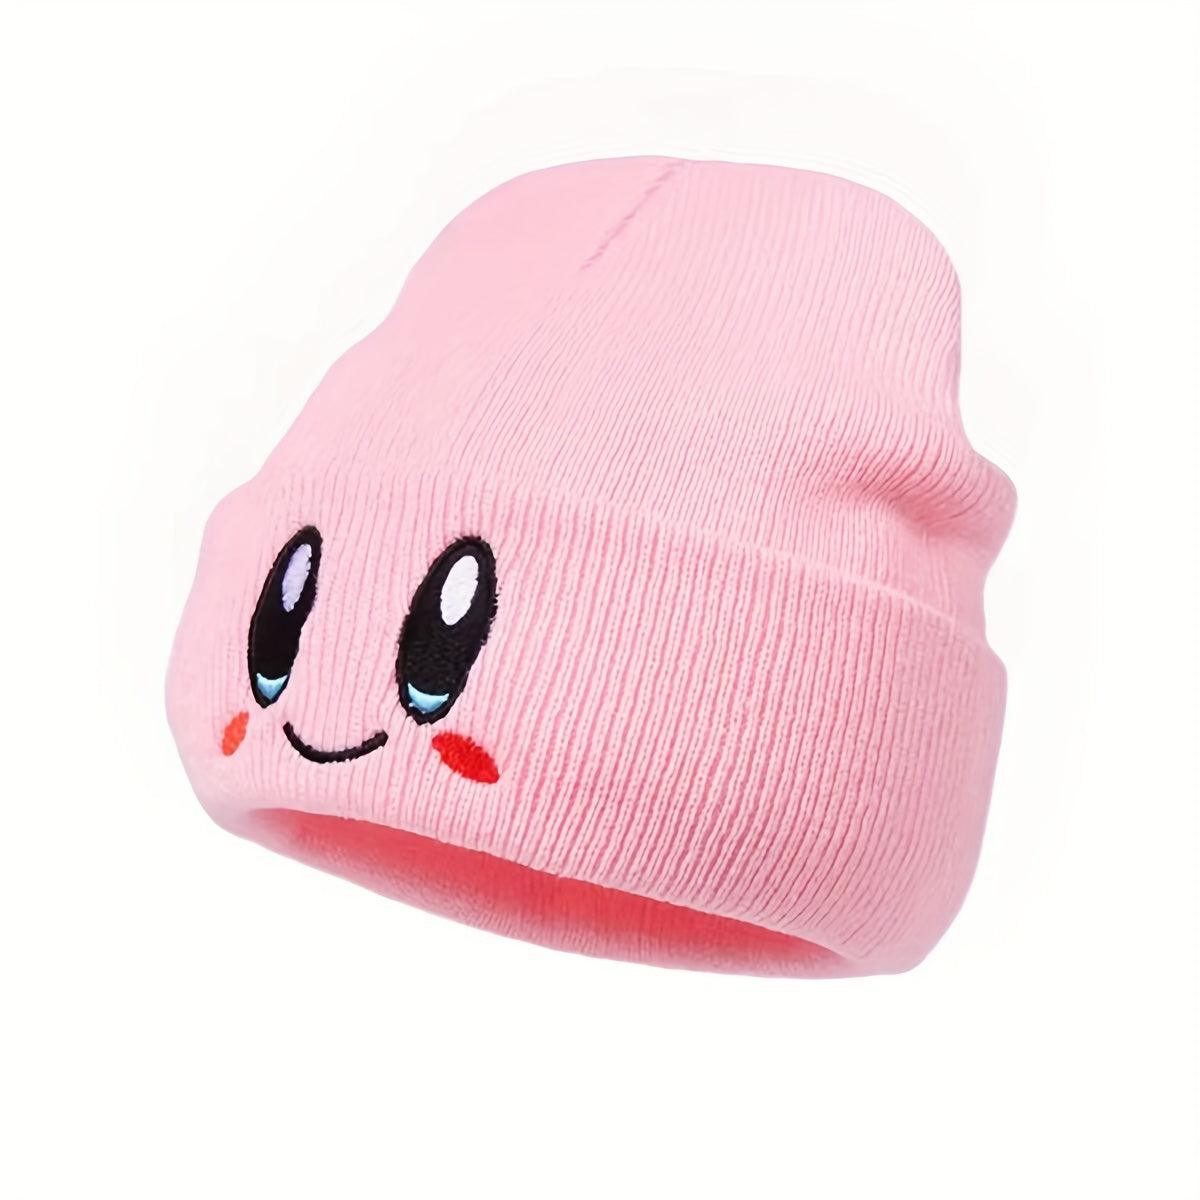 Unisex Anime Cartoon Beanie Hat - Soft, Lightweight, Warm, Elastic Fit, Embroidered Smiling Face Design, Acrylic Material, Perfect for Skiing, Outdoor Activities - Cute, Colorful, One-Size-Fits-Most, Couple-Friendly - Rexpect Nerd